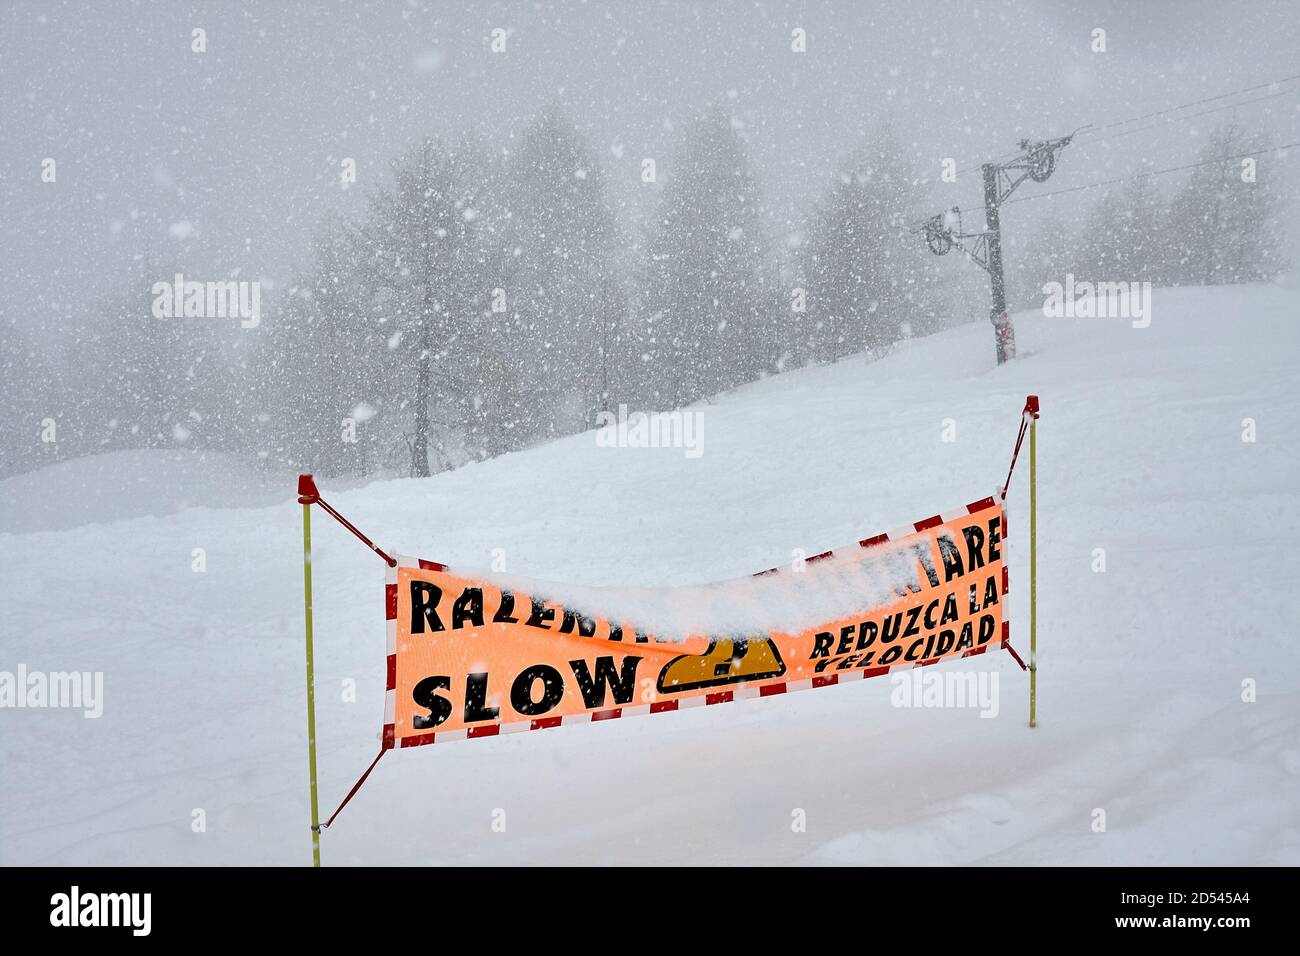 Ski slop warning sign in heavy snowing Stock Photo